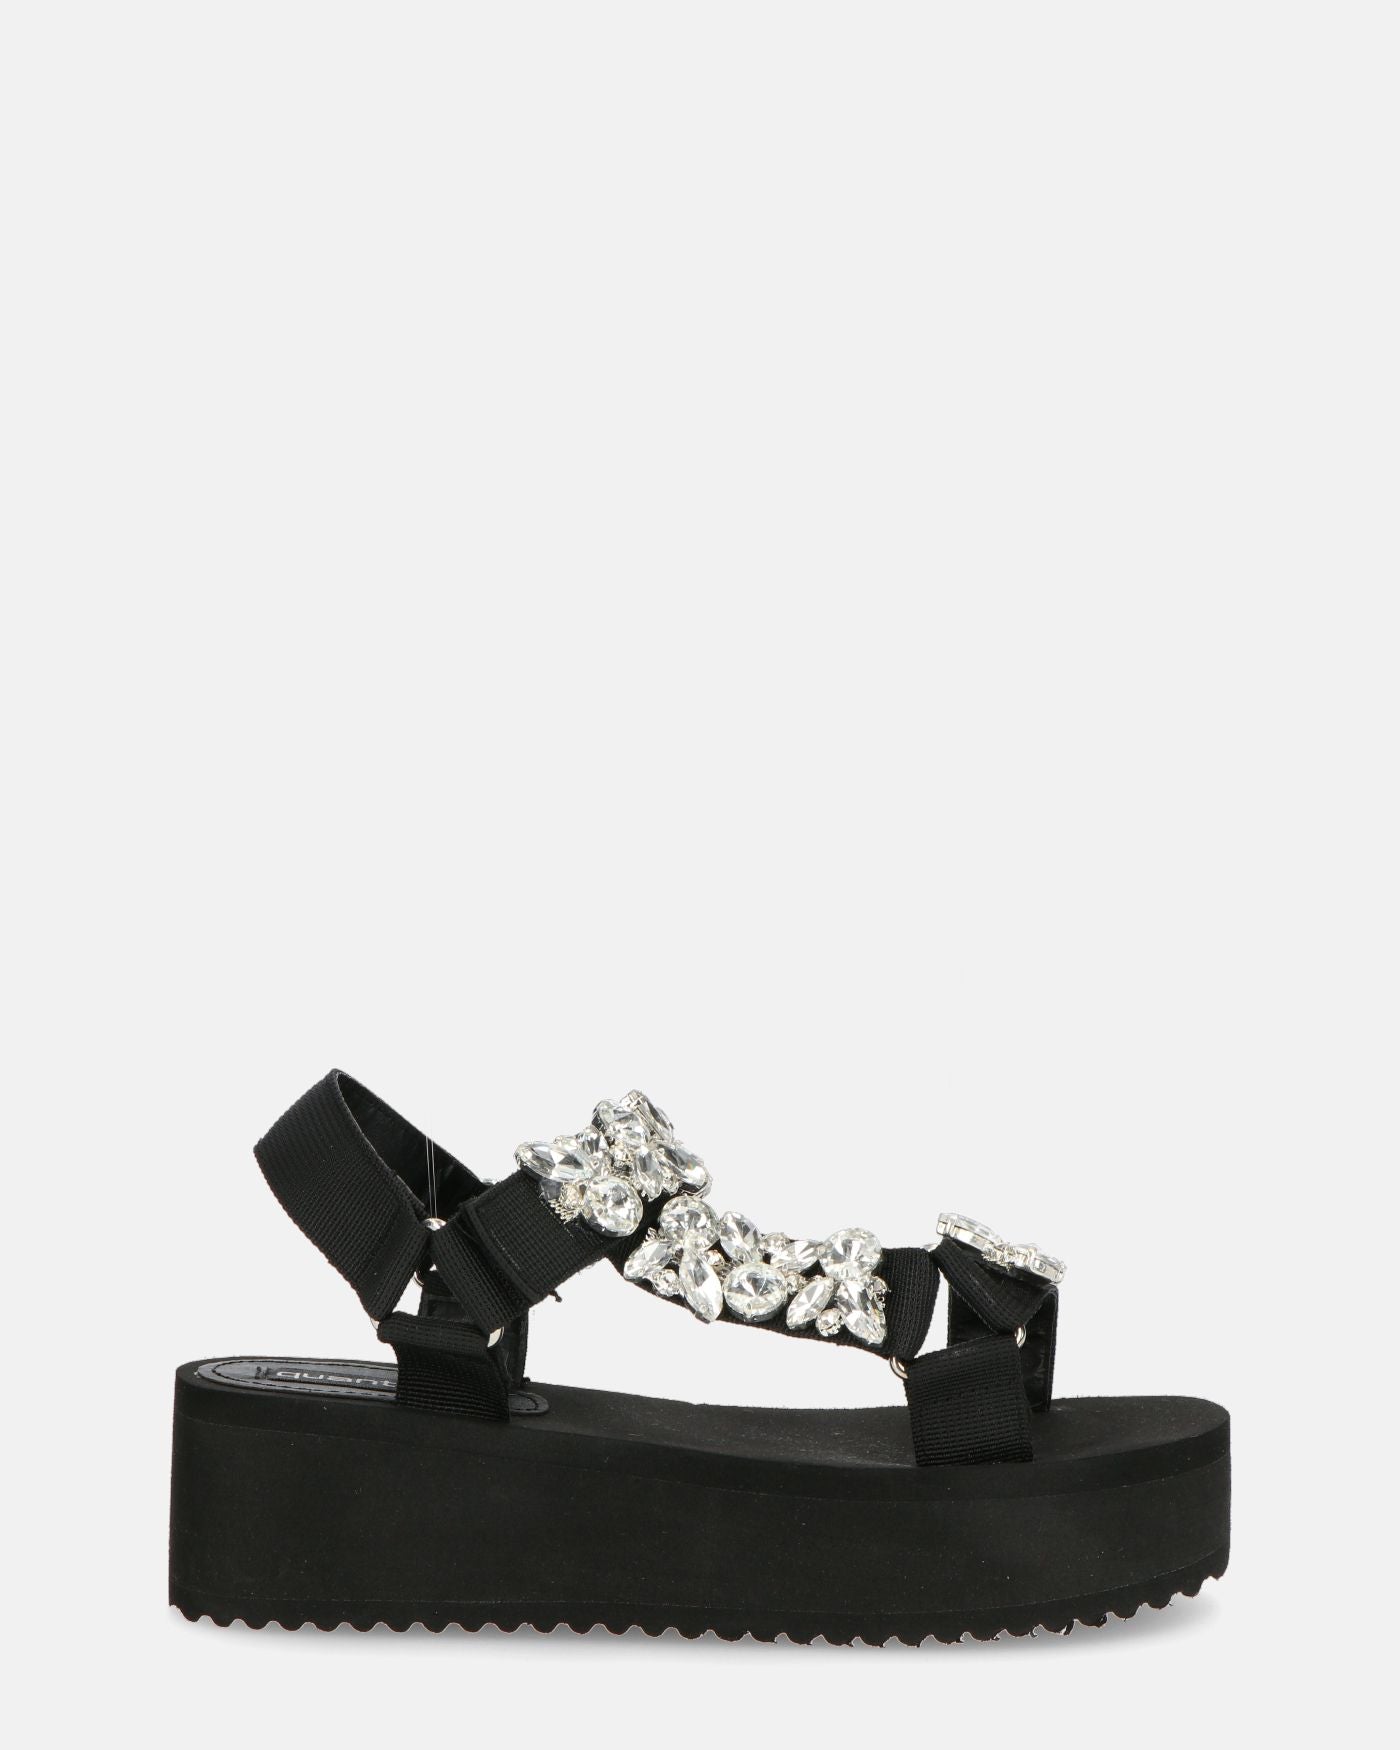 LIZIE - platform ankle boots in black suede and gems